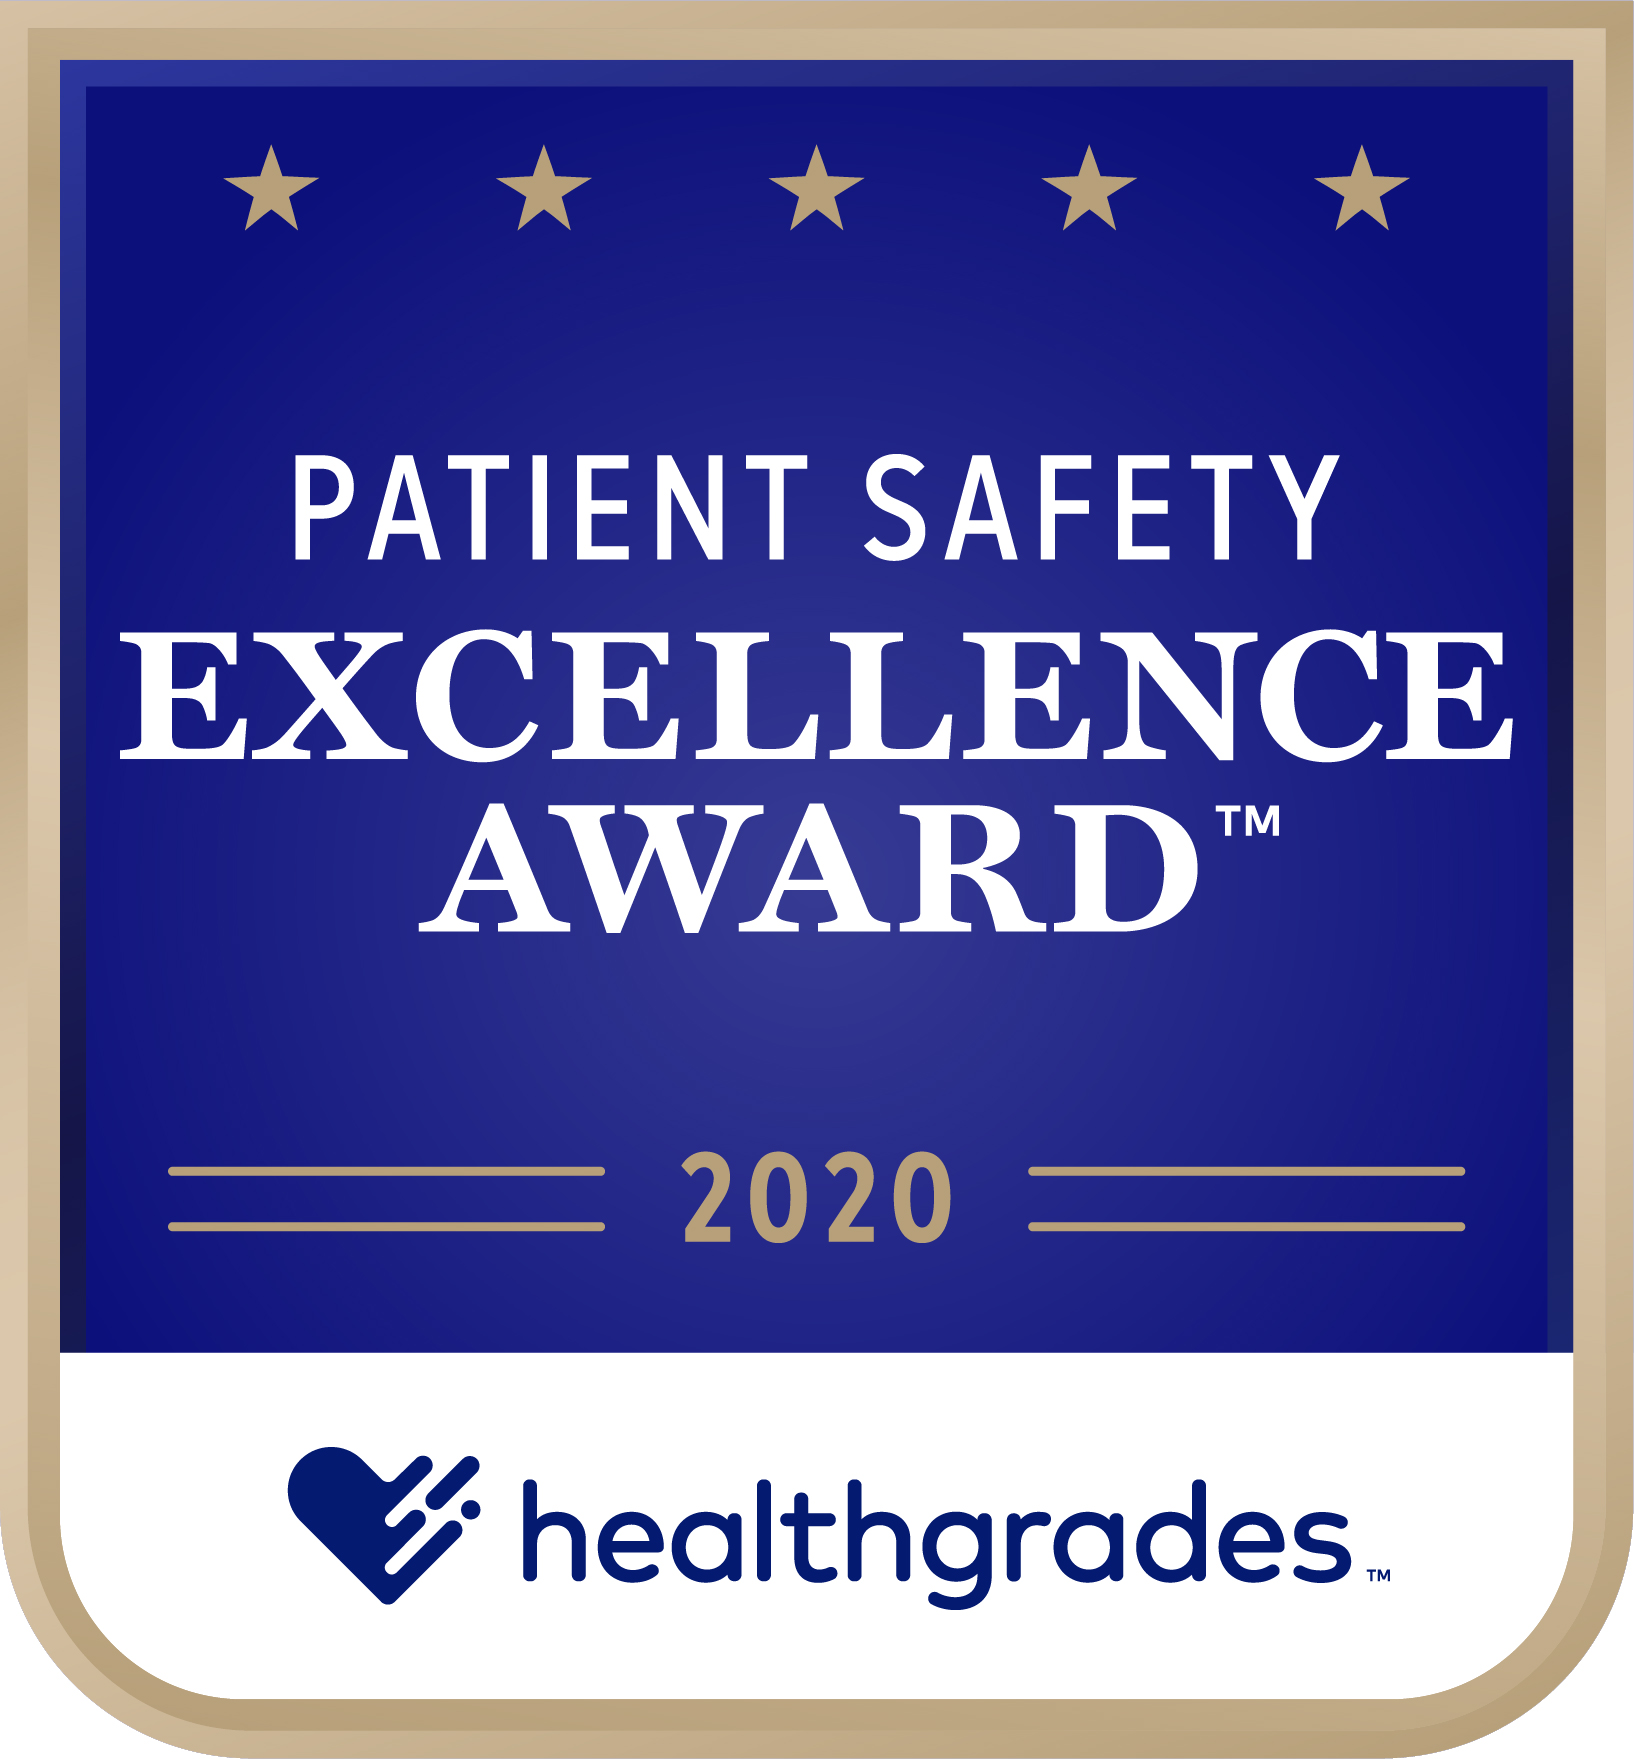 HG_Patient_Safety_Award_Image